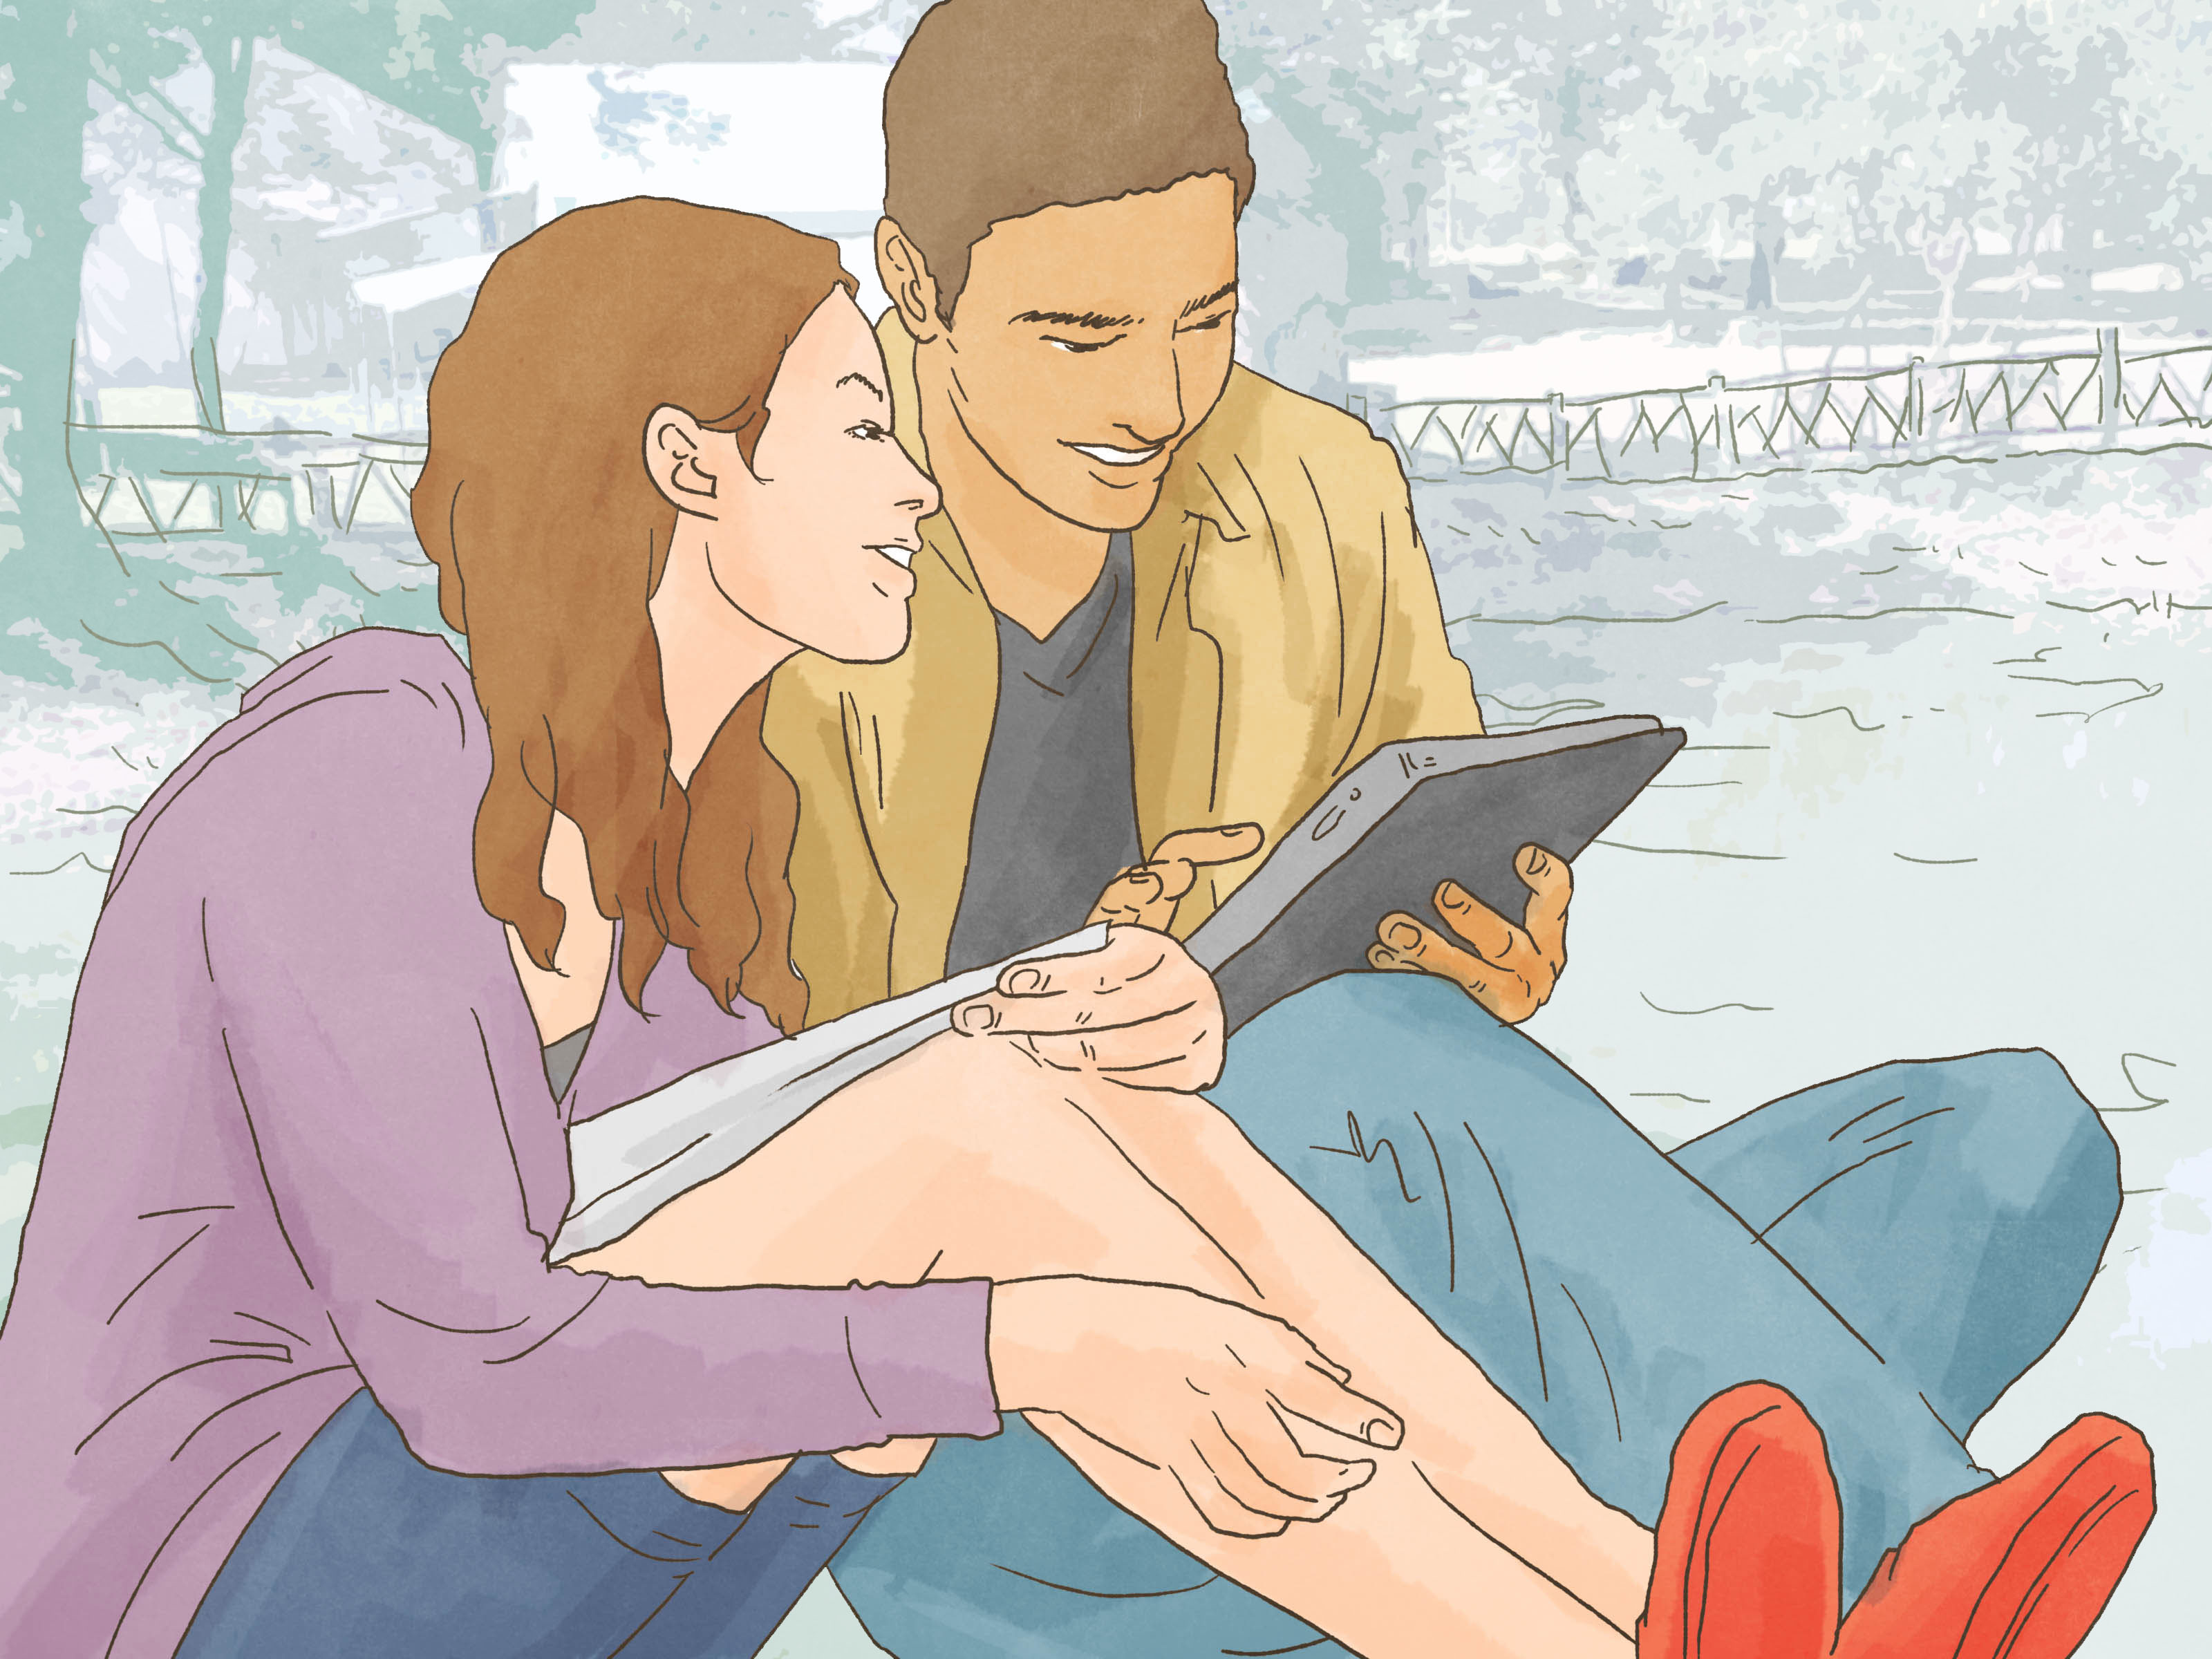 Ways To Treat Girls With Respect Wikihow